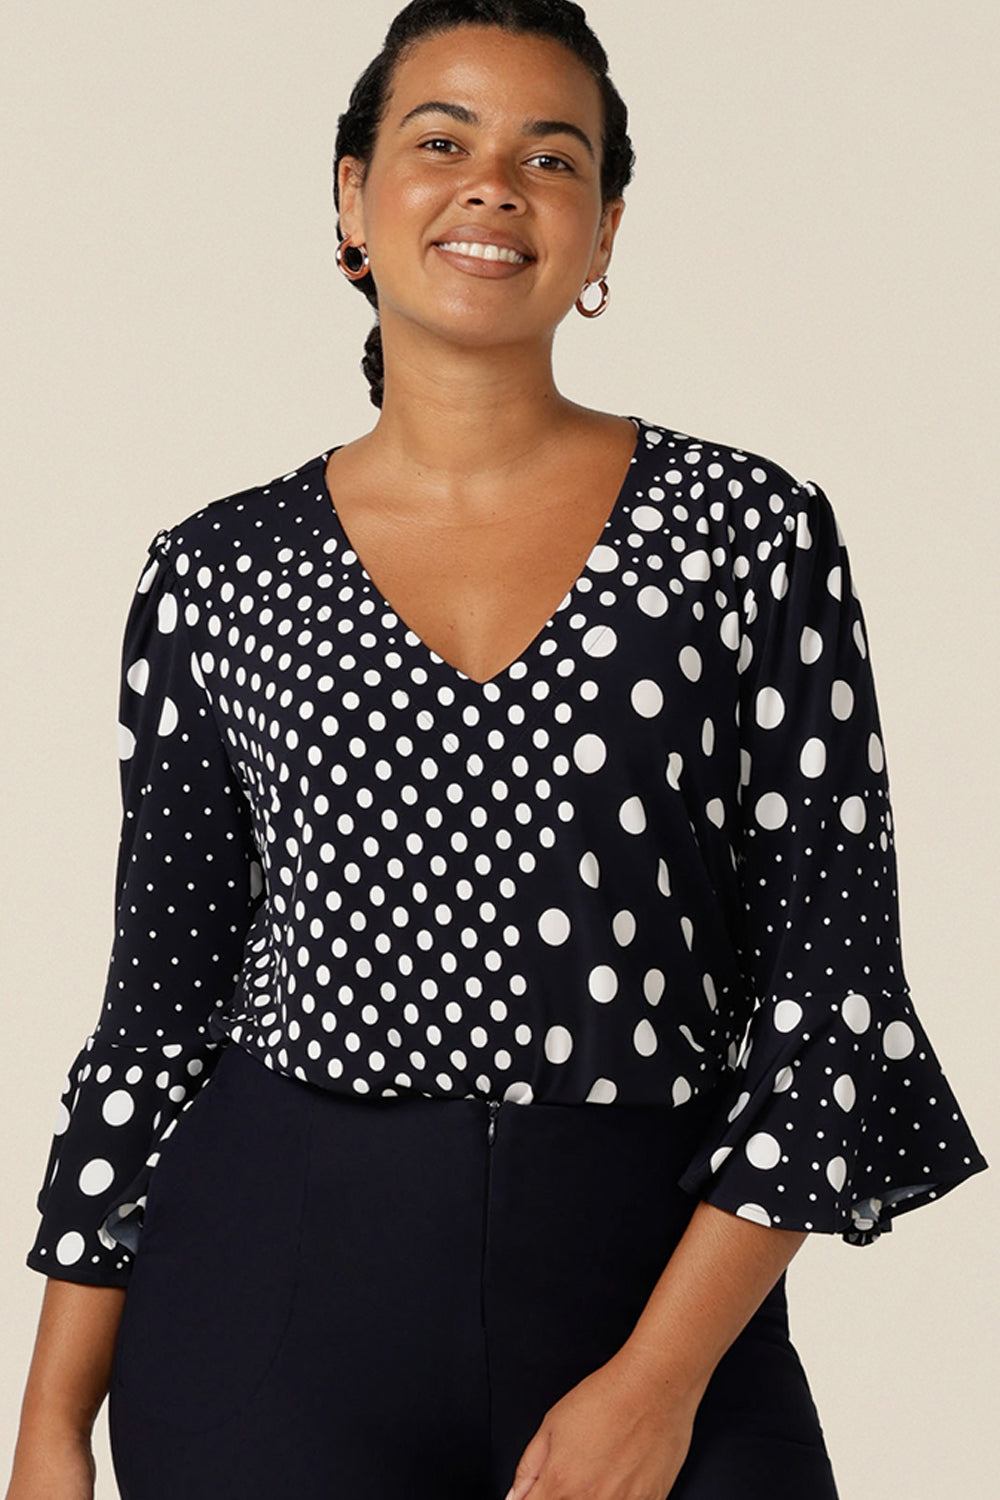 A women's workwear top in navy and white polka dot print. Featuring a V neckline and 3/4 sleeves with fluted cuffs, this top is made in Australia for petite to plus size women,